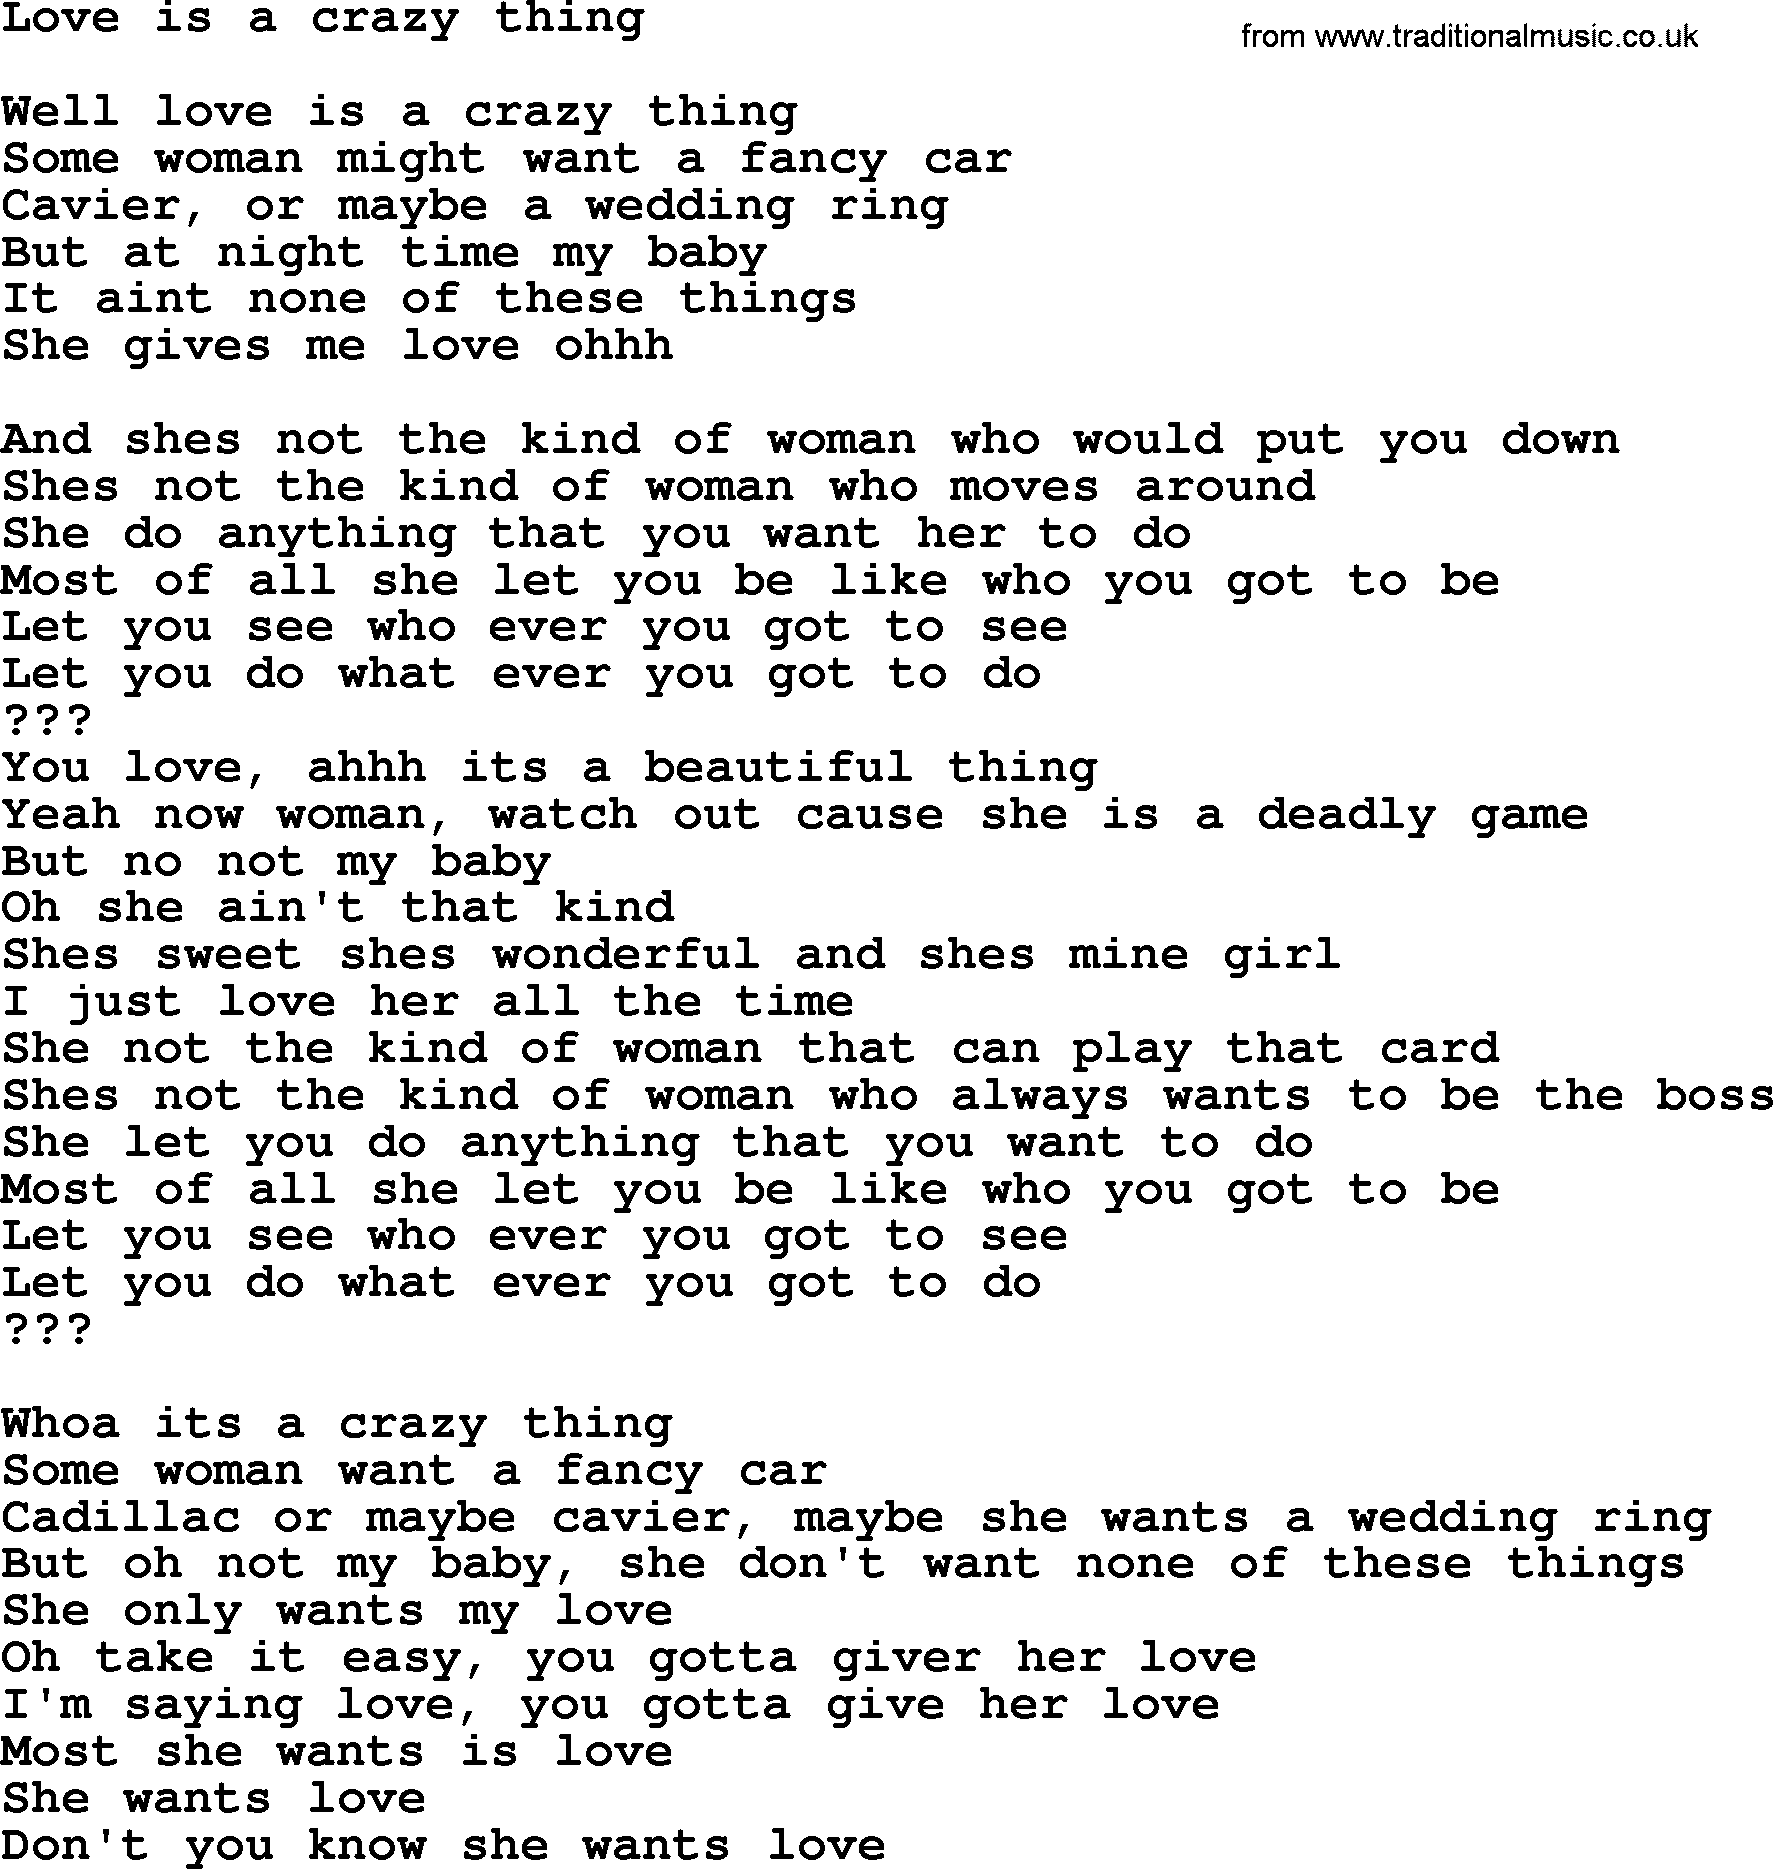 Bruce Springsteen song: Love Is A Crazy Thing, lyrics